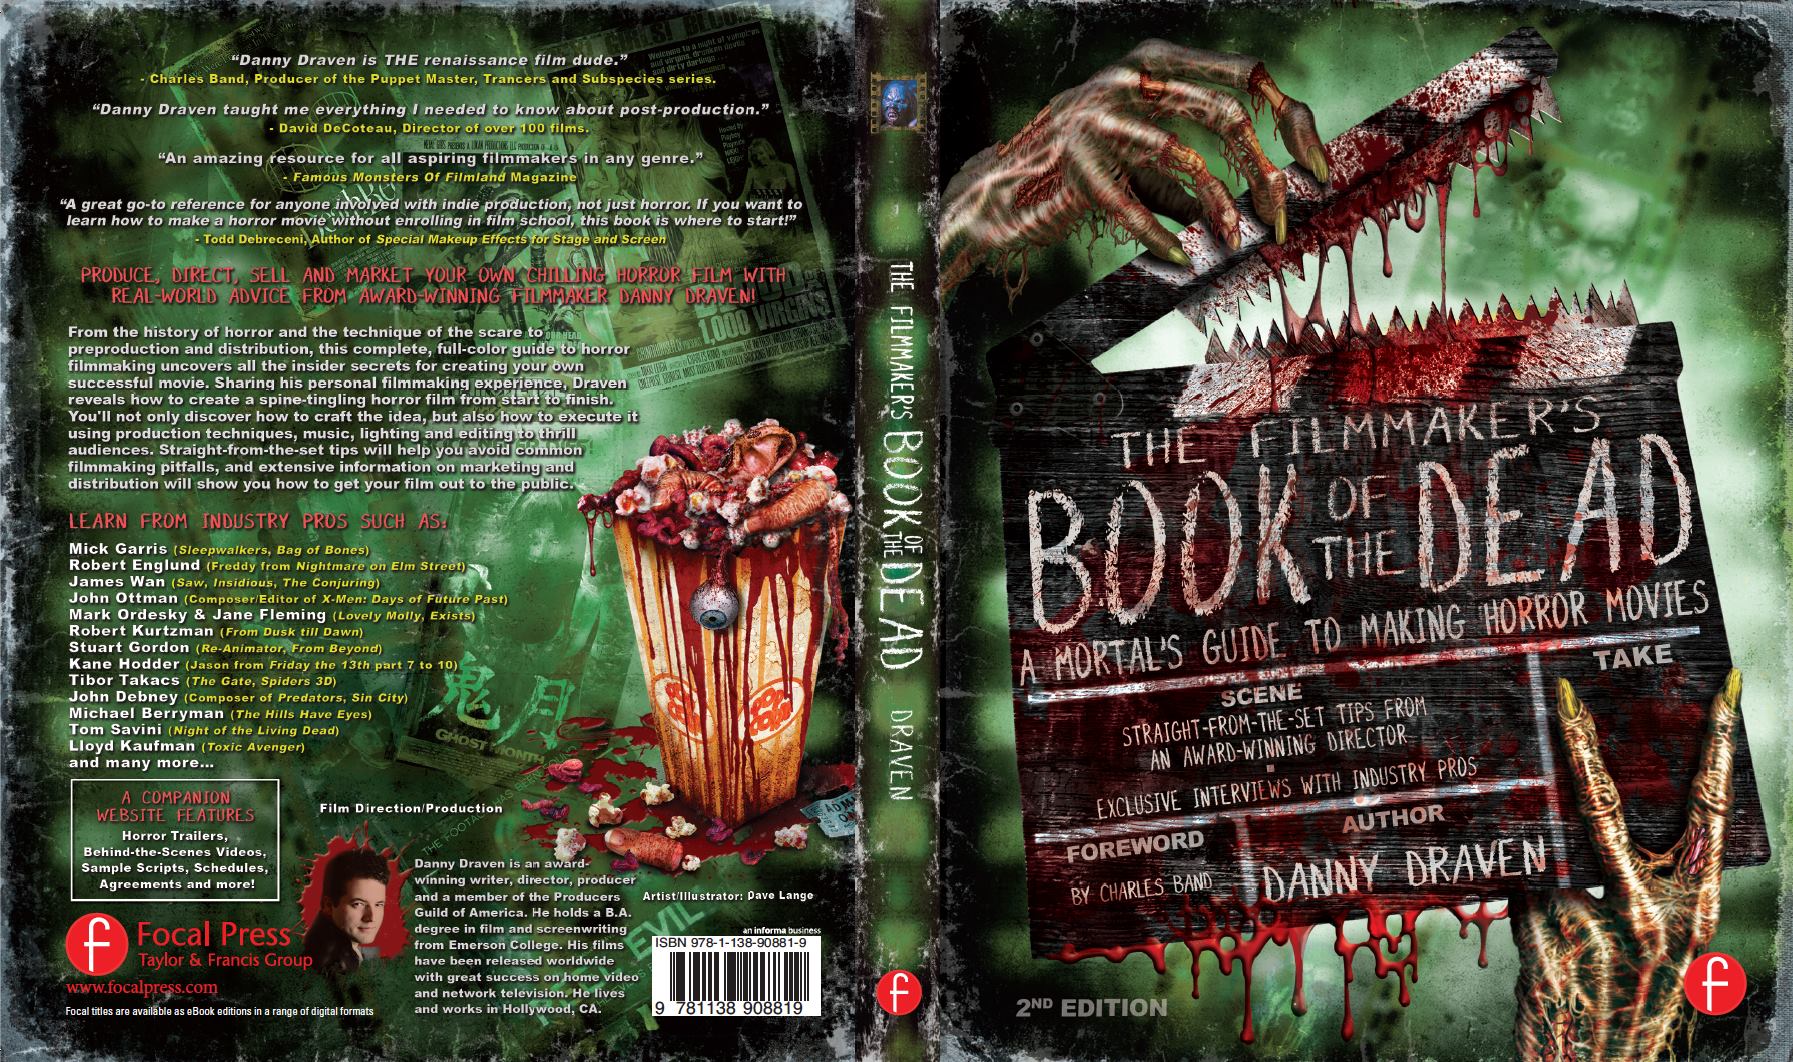 Danny Draven's hit filmmaking book, The Filmmaker's Book of the Dead: A Mortal's Guide to Making Horror Movies, 2nd Edition (2016 - Focal Press) Available worldwide in paperback, hardcover and digital editions.